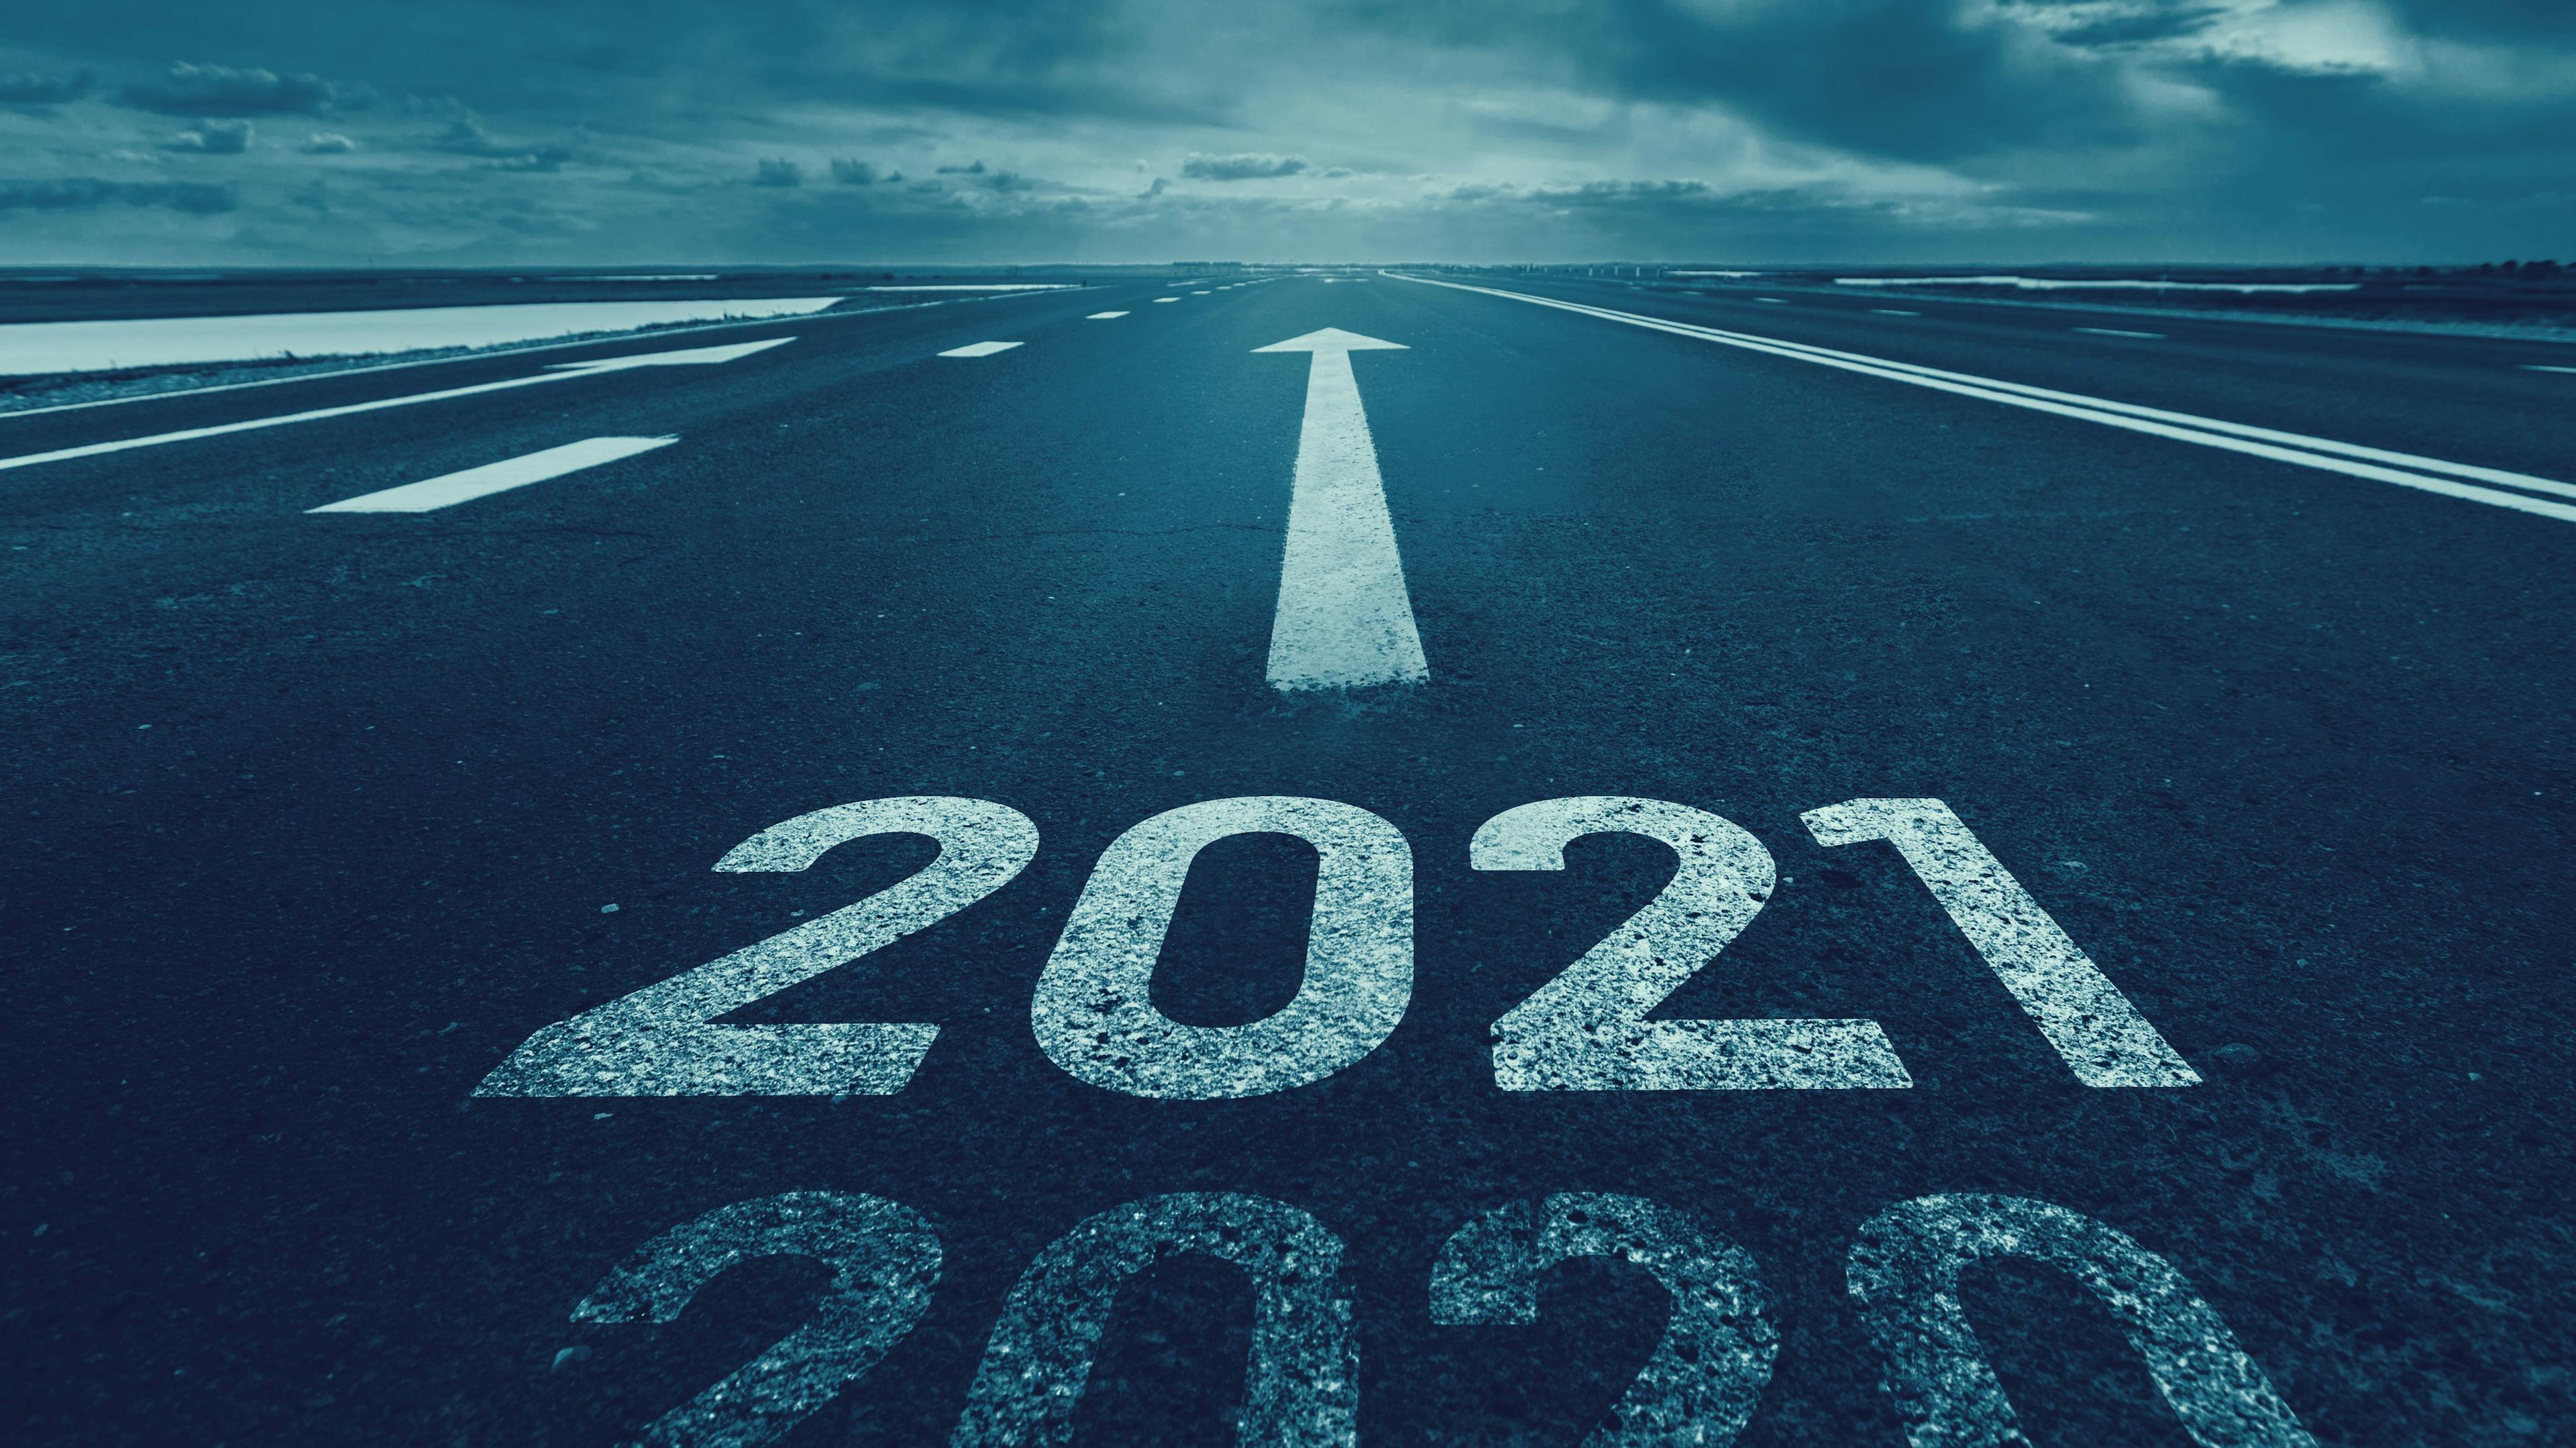 Forrester's 2021 Prediction: Watch Out In-Person Care, the Telehealth Surge Will Continue